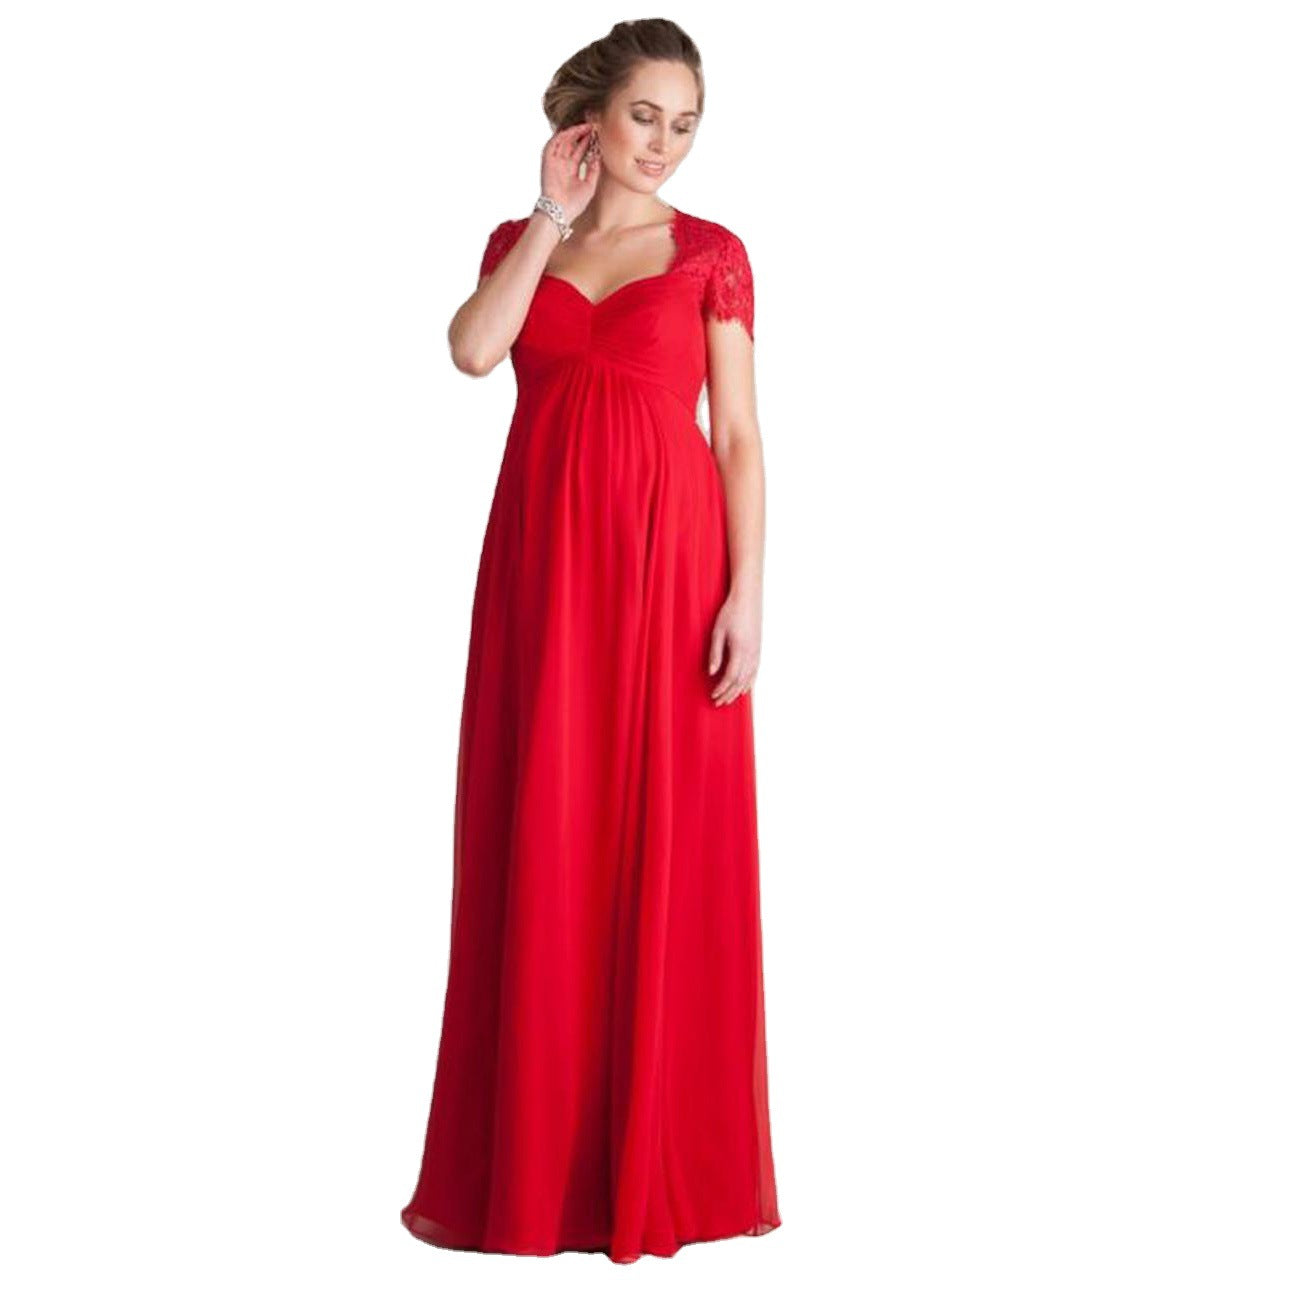 Maternity Photography Props Pregnancy Sequins Tulle Dress